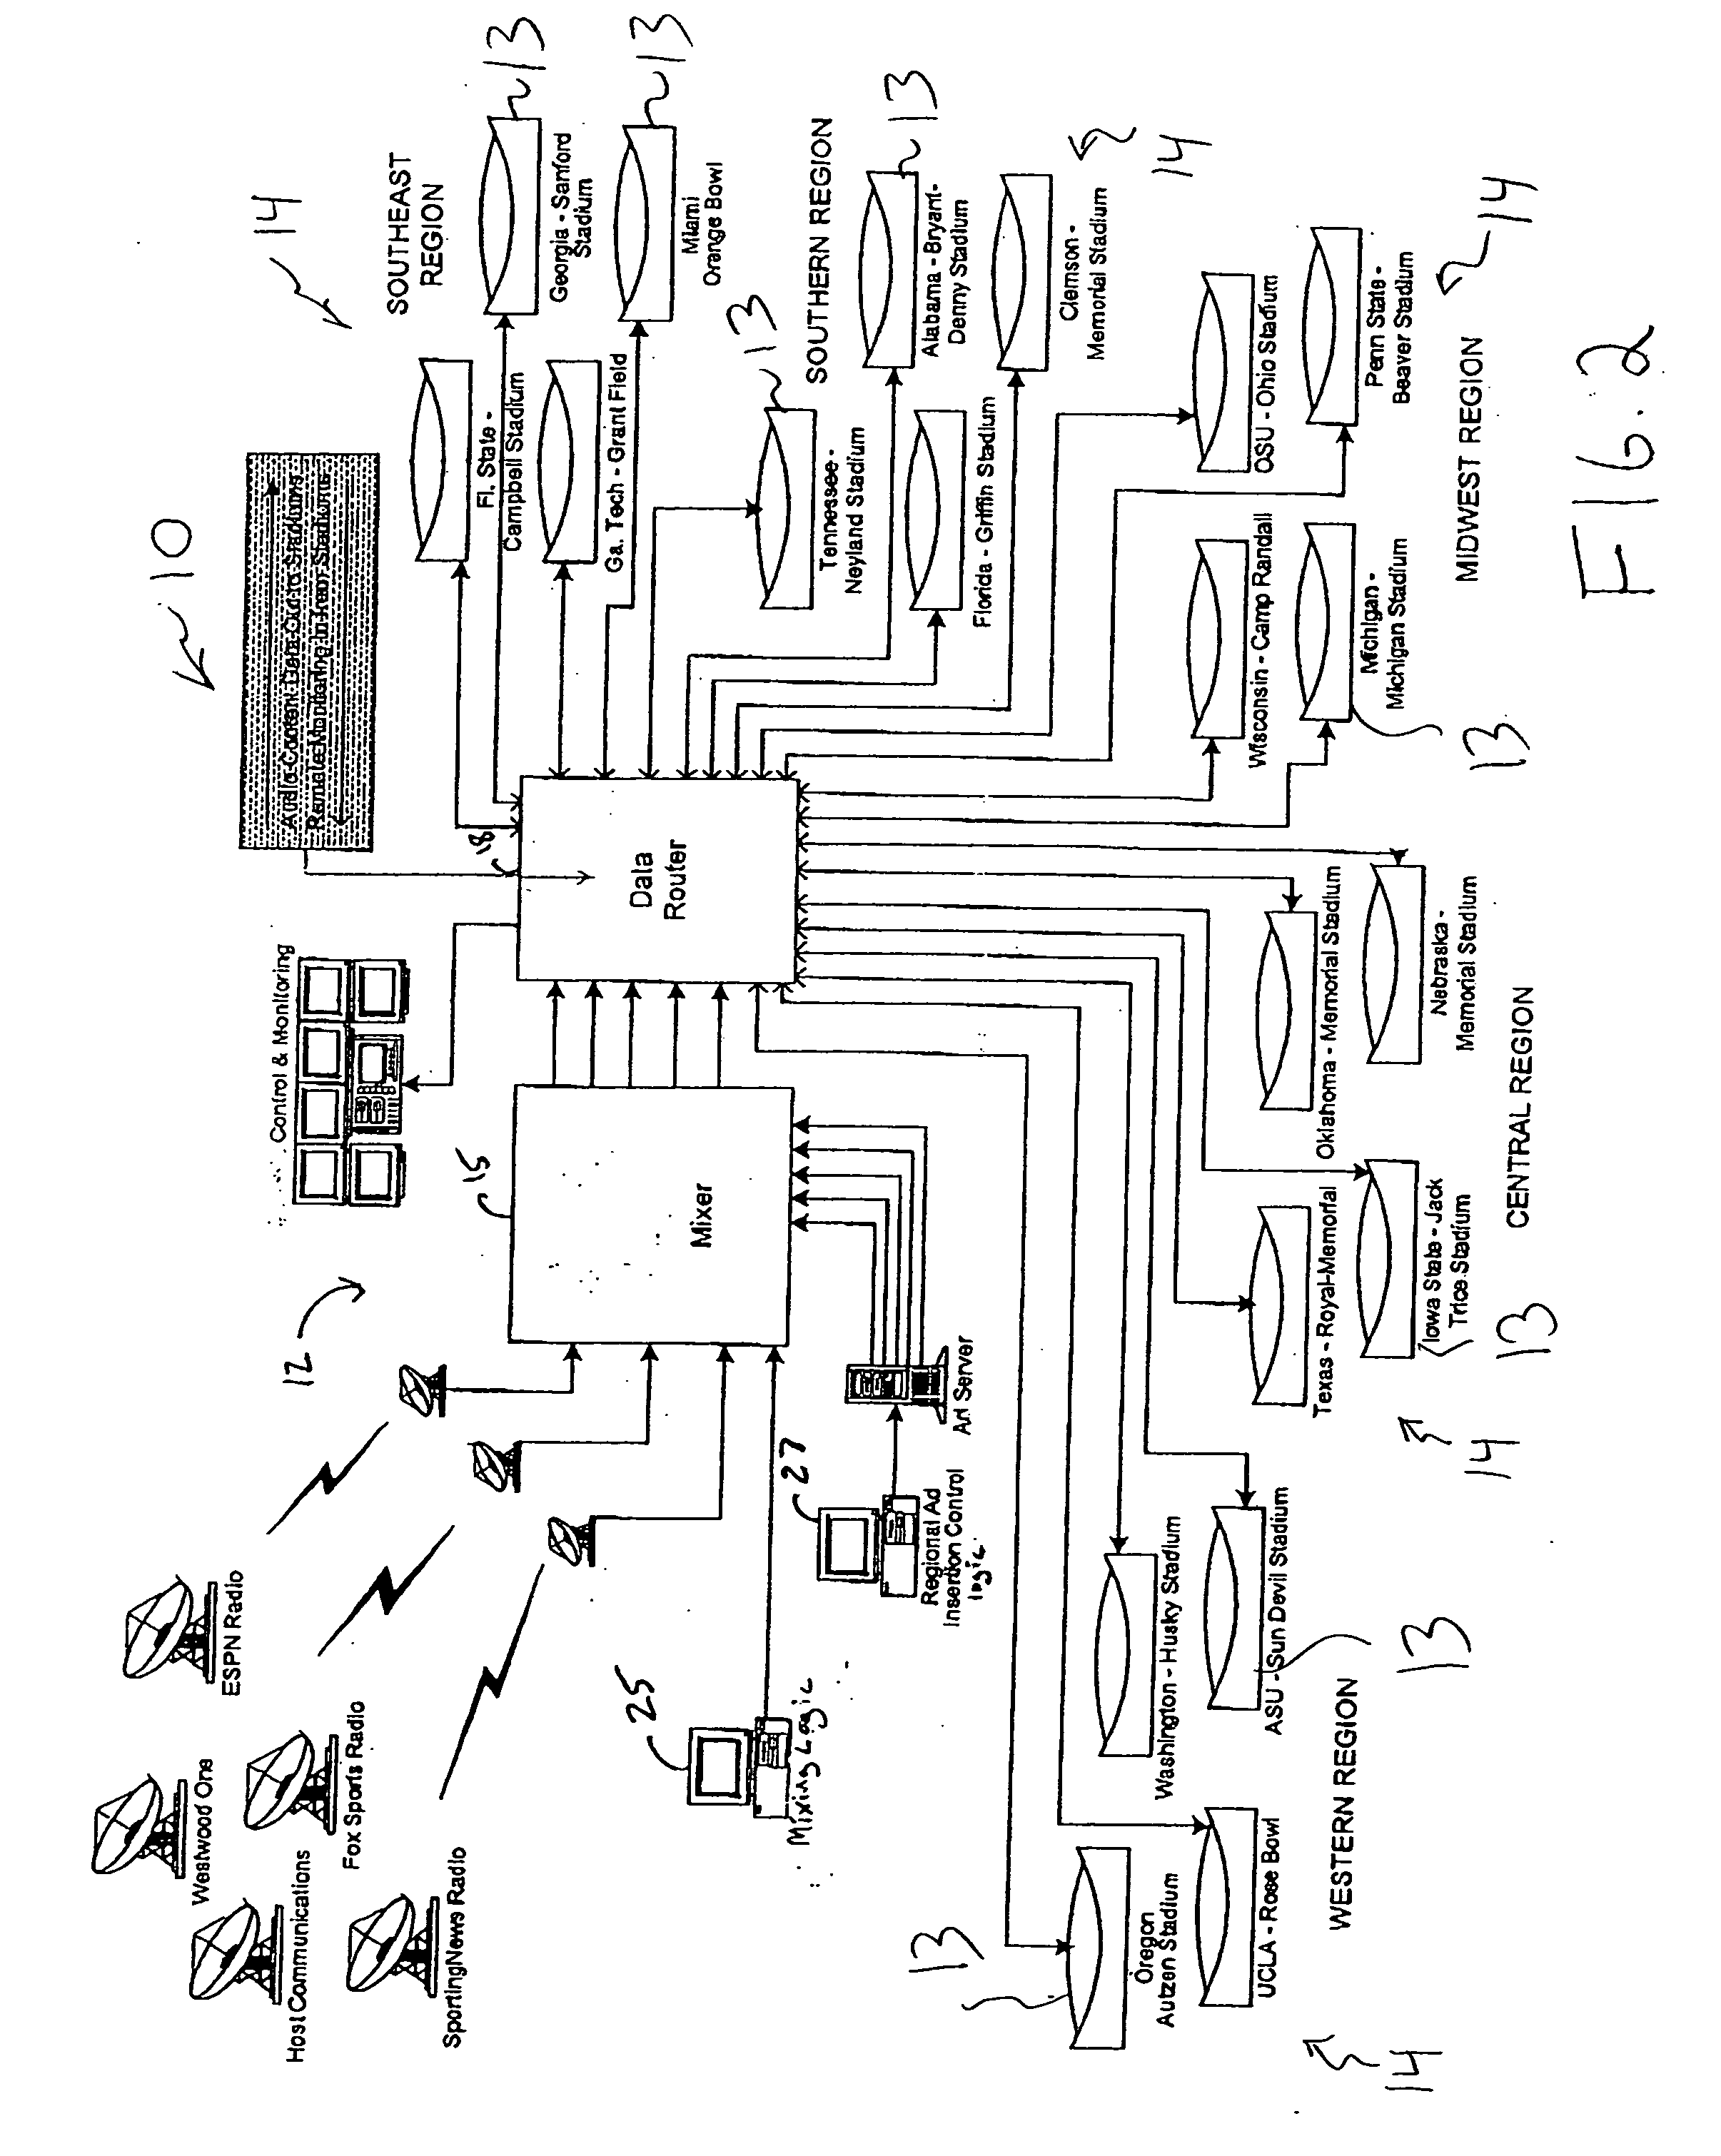 System and method for providing event spectators with audio/video signals pertaining to remote events